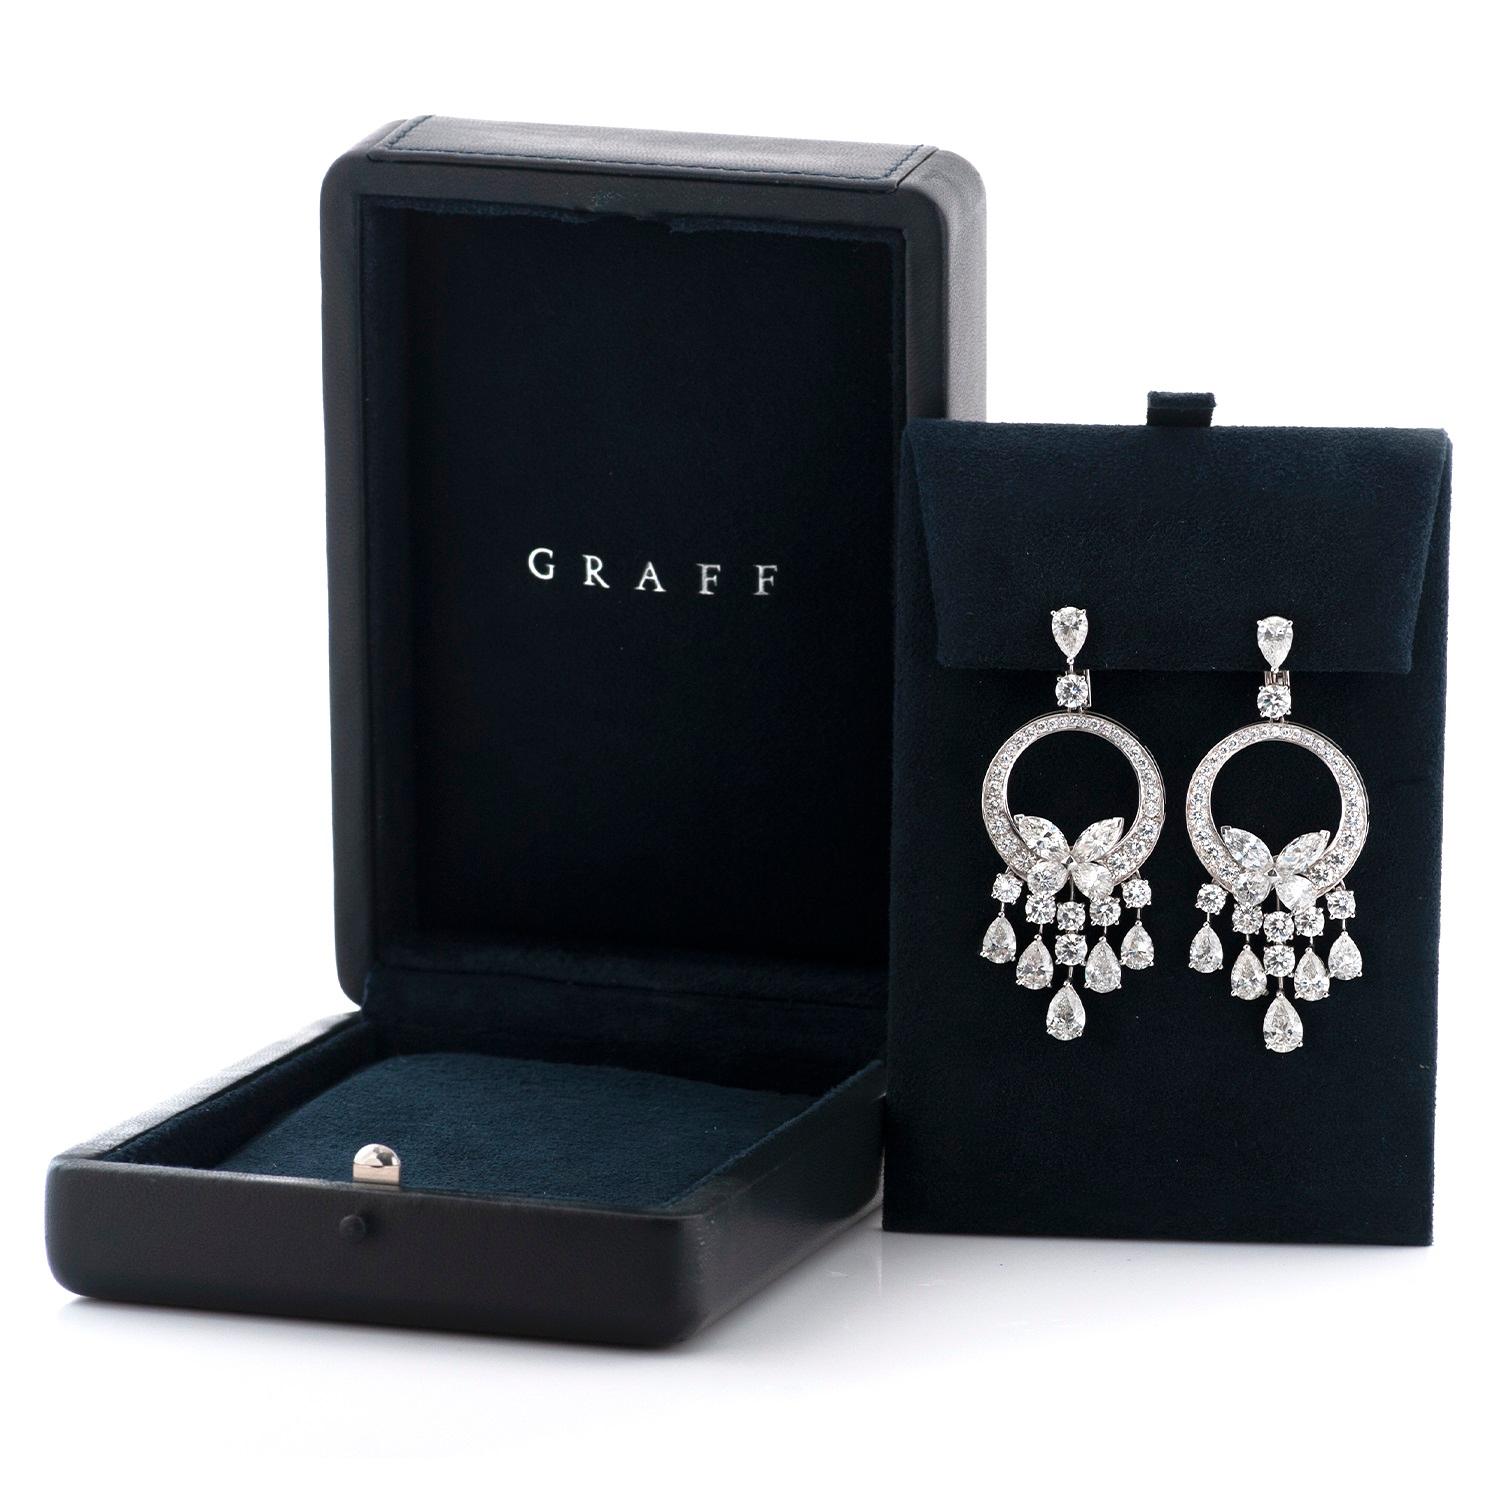 Graff Classic Butterfly chandelier diamond earrings/ear clips in 18k white gold accompanied by Graff Certificate of Quality and Graff Box.  

These earrings feature two marquise shape diamond  butterflies in a halo of round brilliant cut diamonds